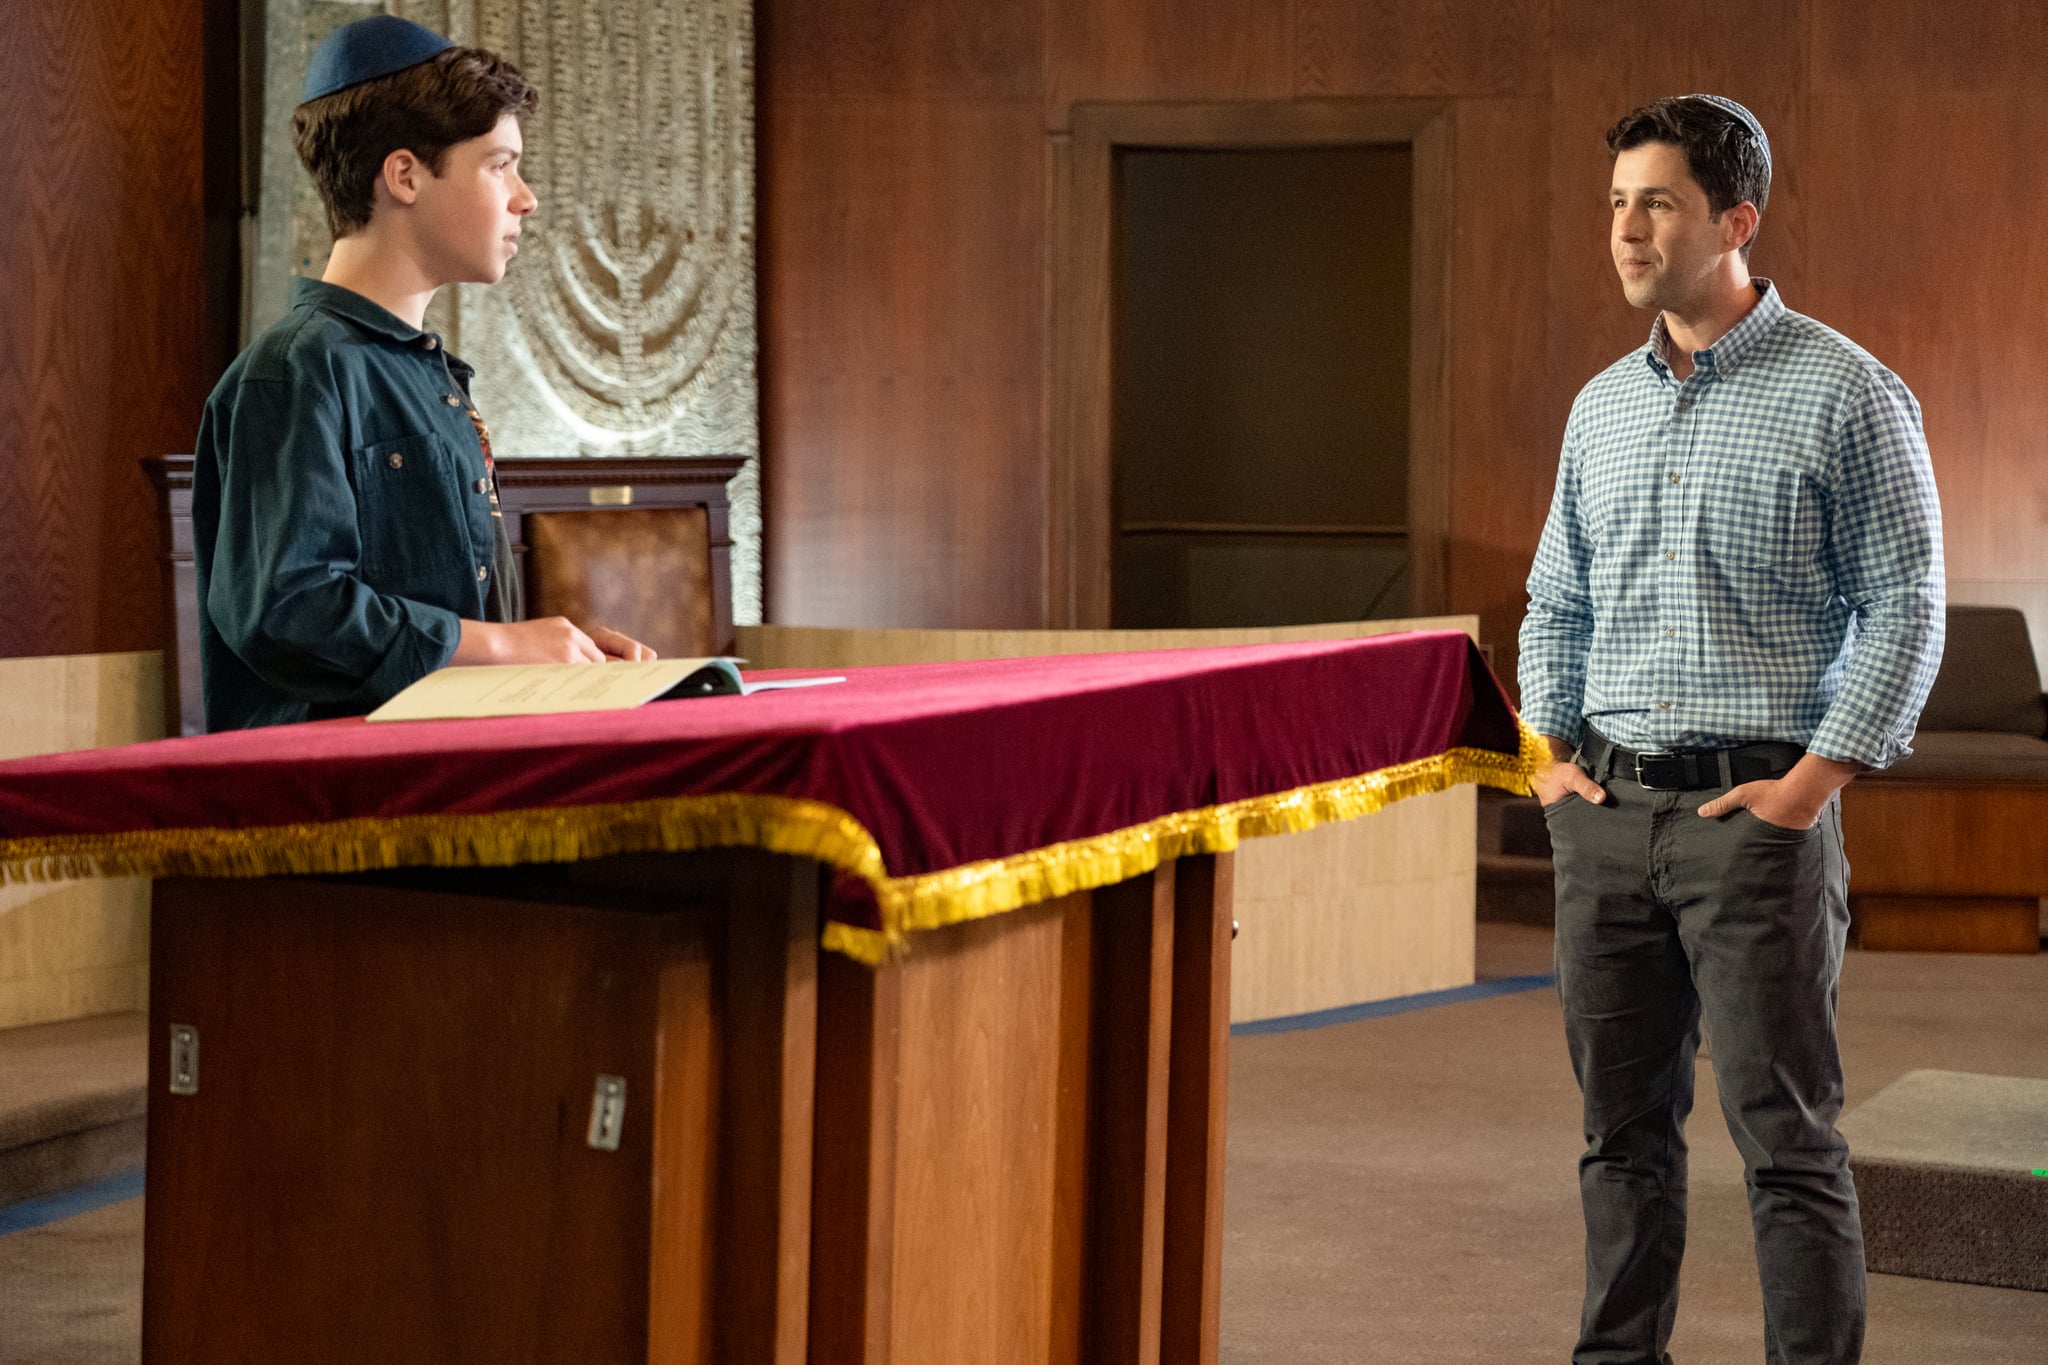 13 The Musical. (L to R) Eli Golden as Evan, Josh Peck as Rabbi in 13 The Musical. Cr. Alan Markfield/Netflix © 2022.